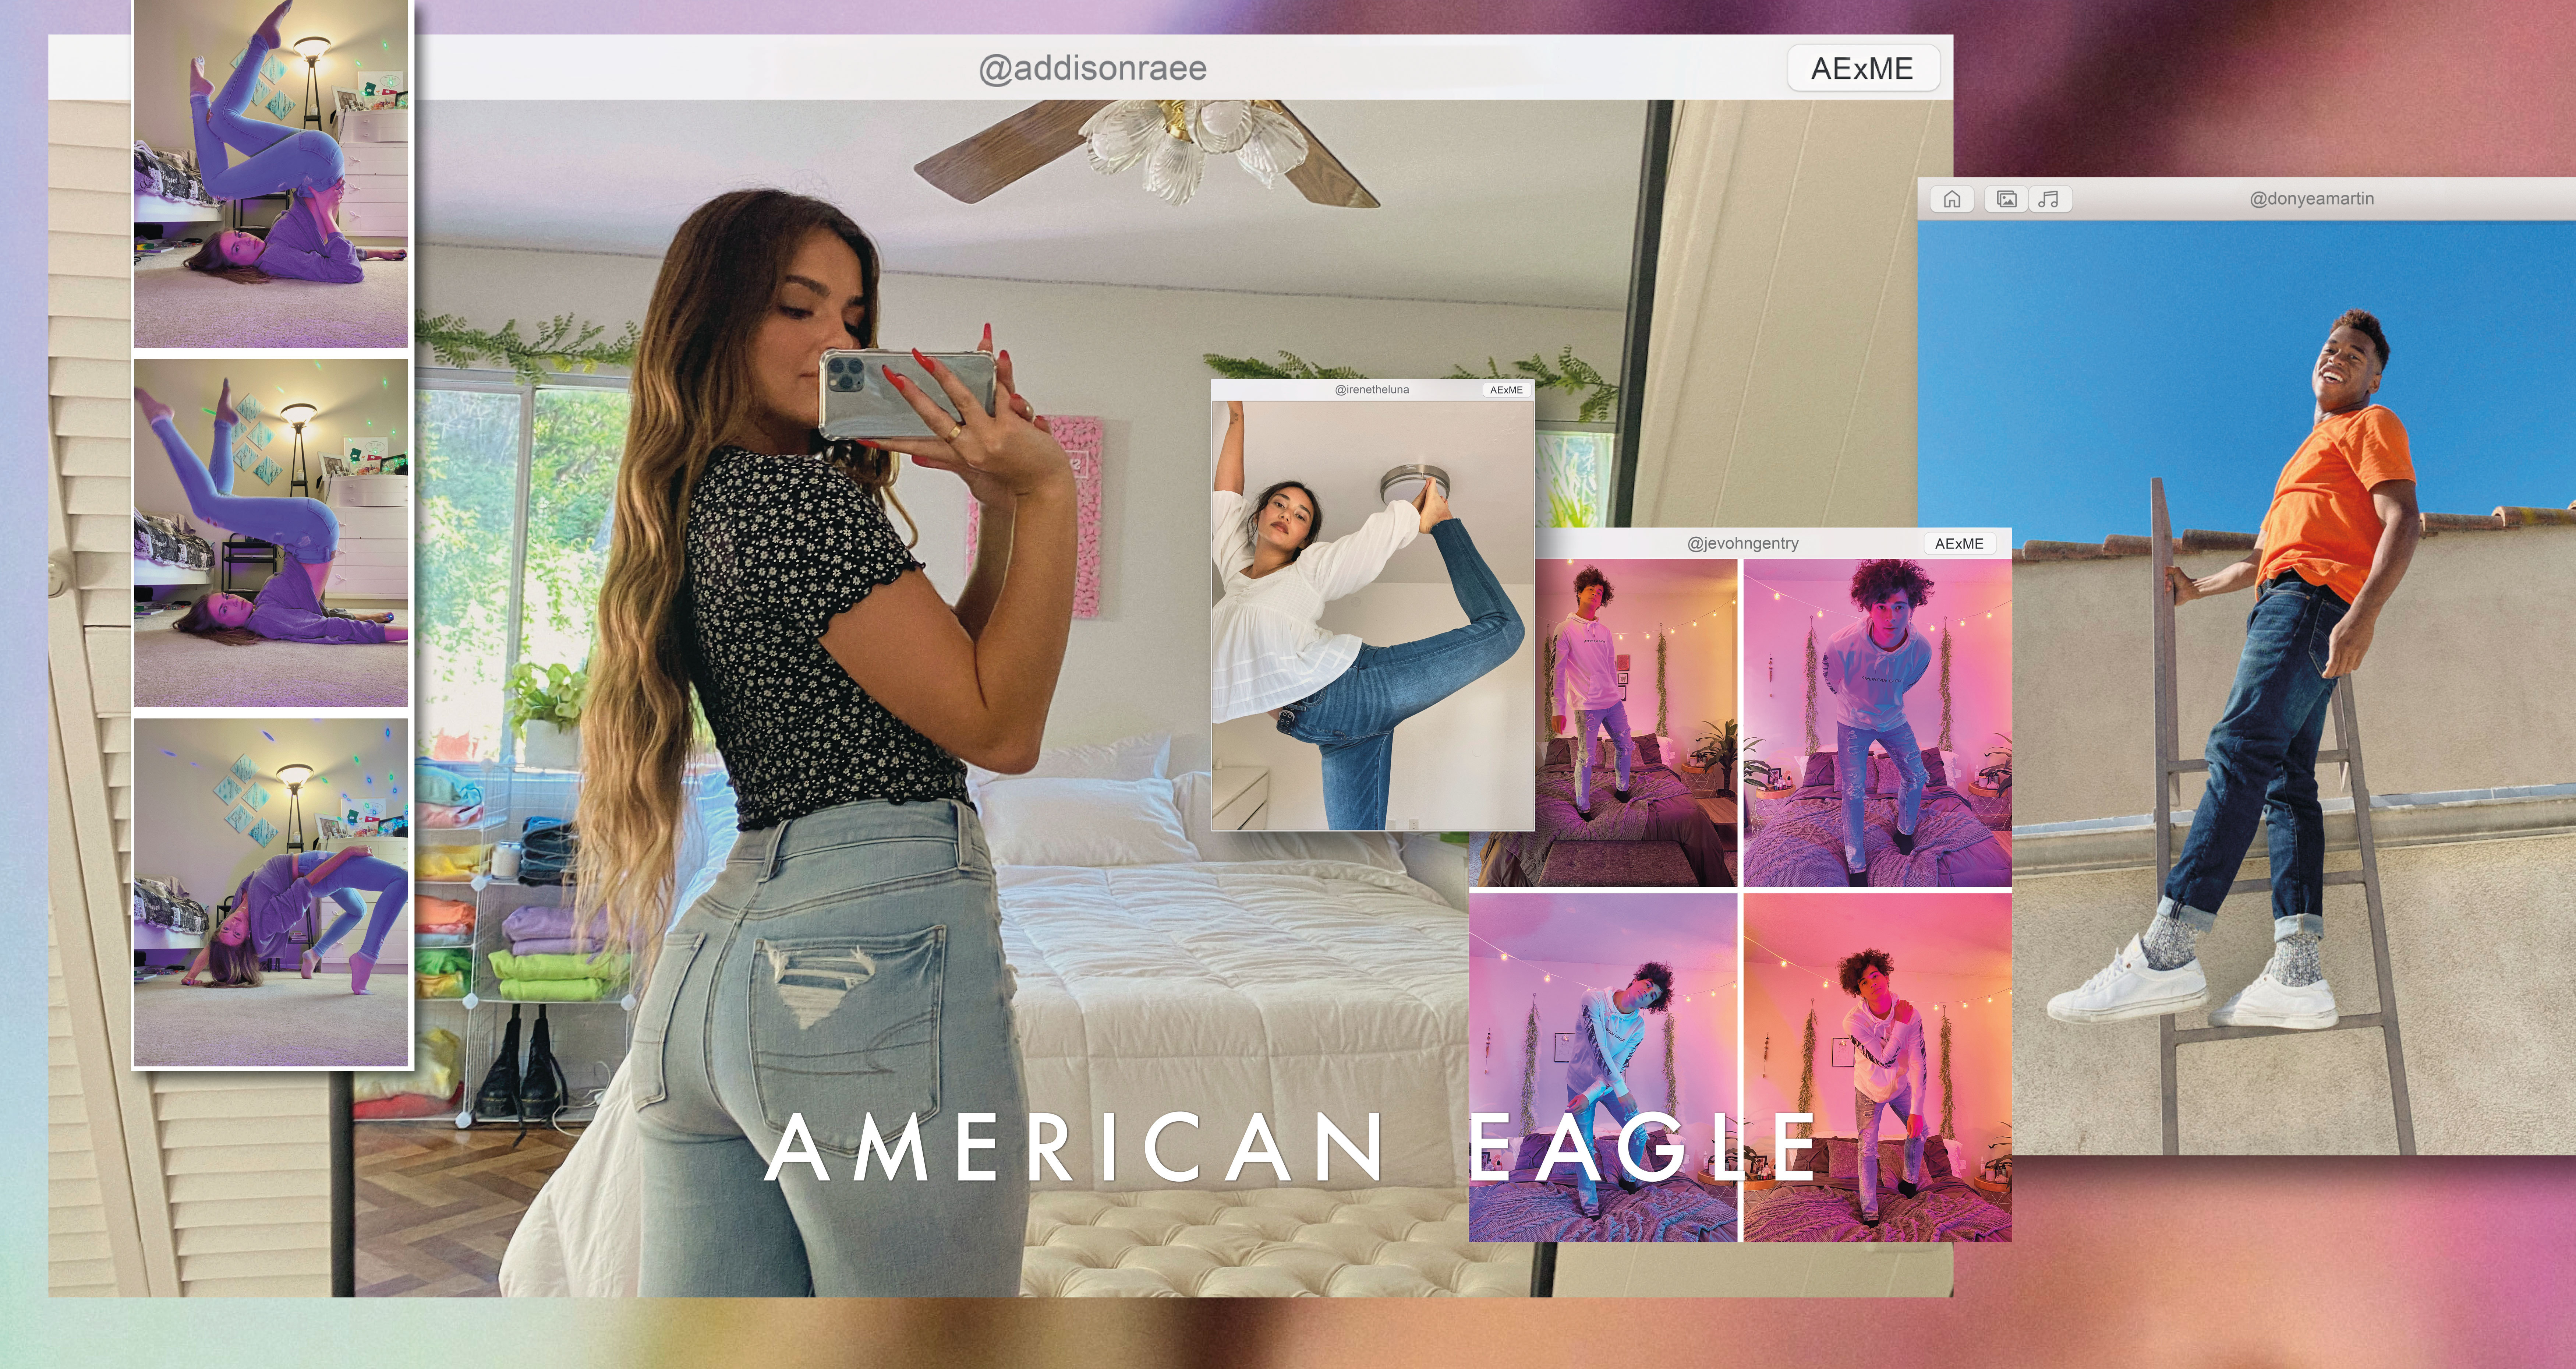 American Eagle Launches Back To School '20 Campaign Entirely Over Zoom Highlighting the Self-Expression of Youth Culture and Their Love of TikTok | Business Wire